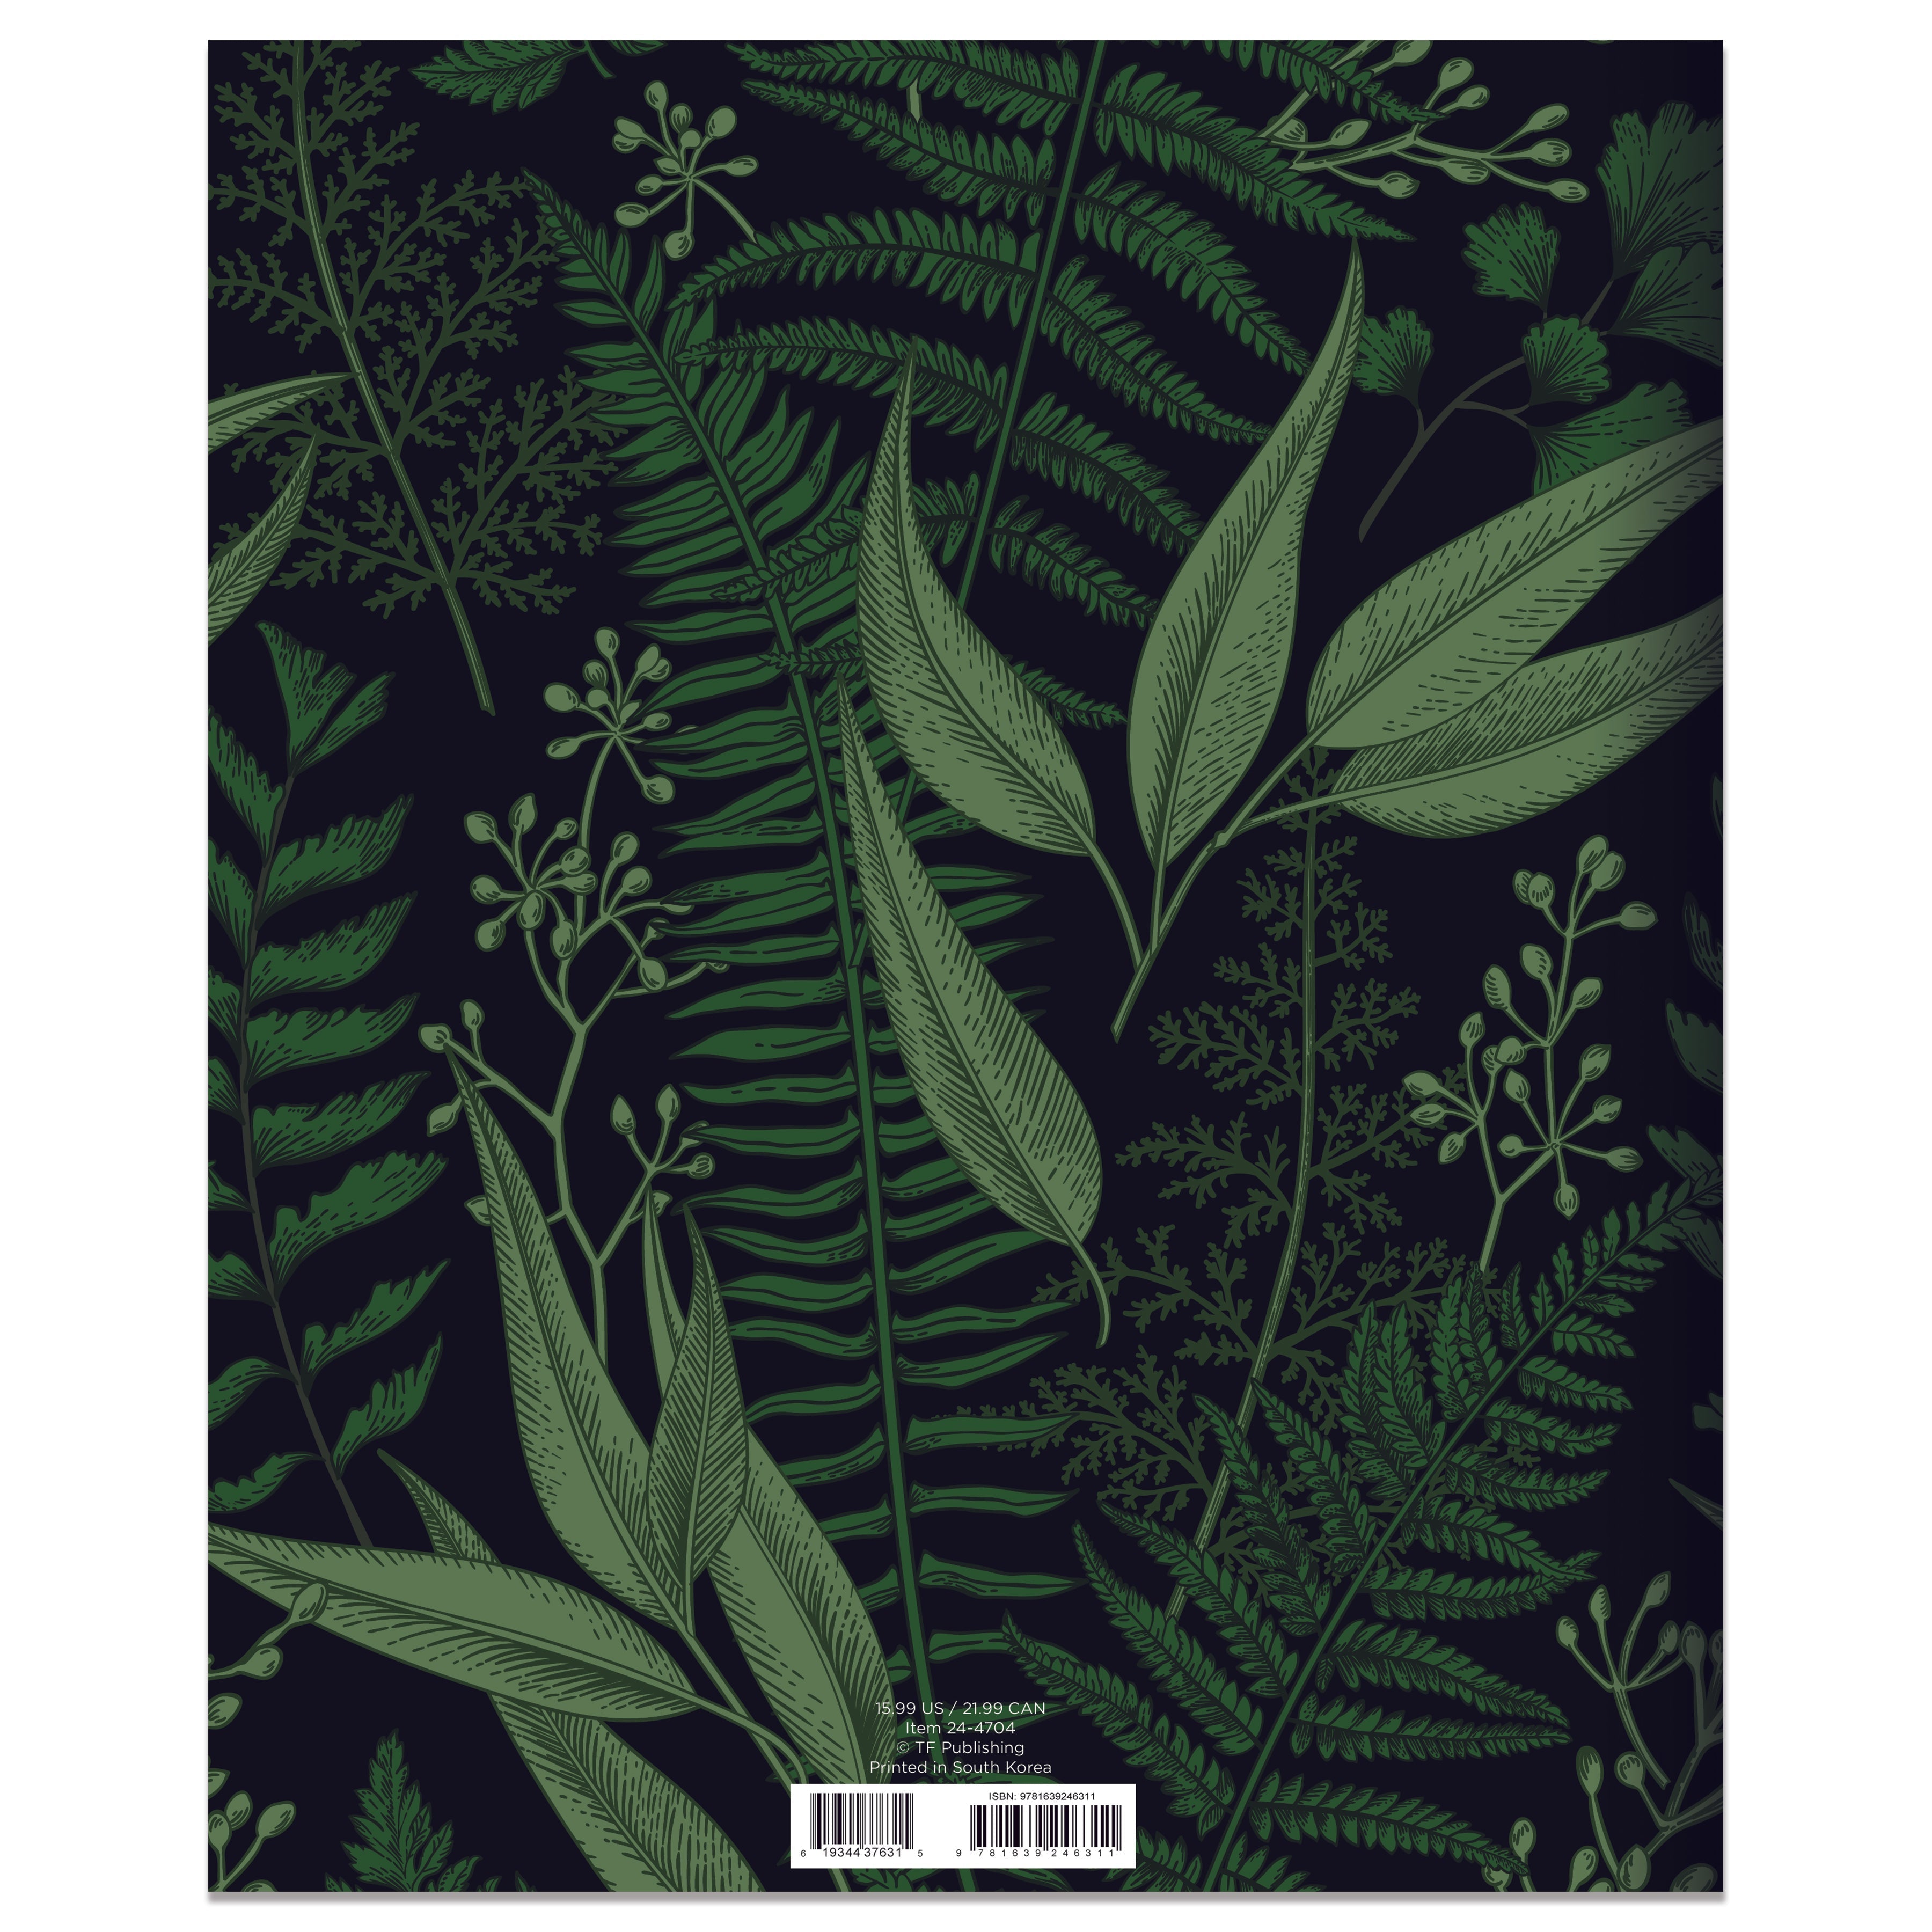 2024 Botanical Dream - Large Monthly Diary/Planner